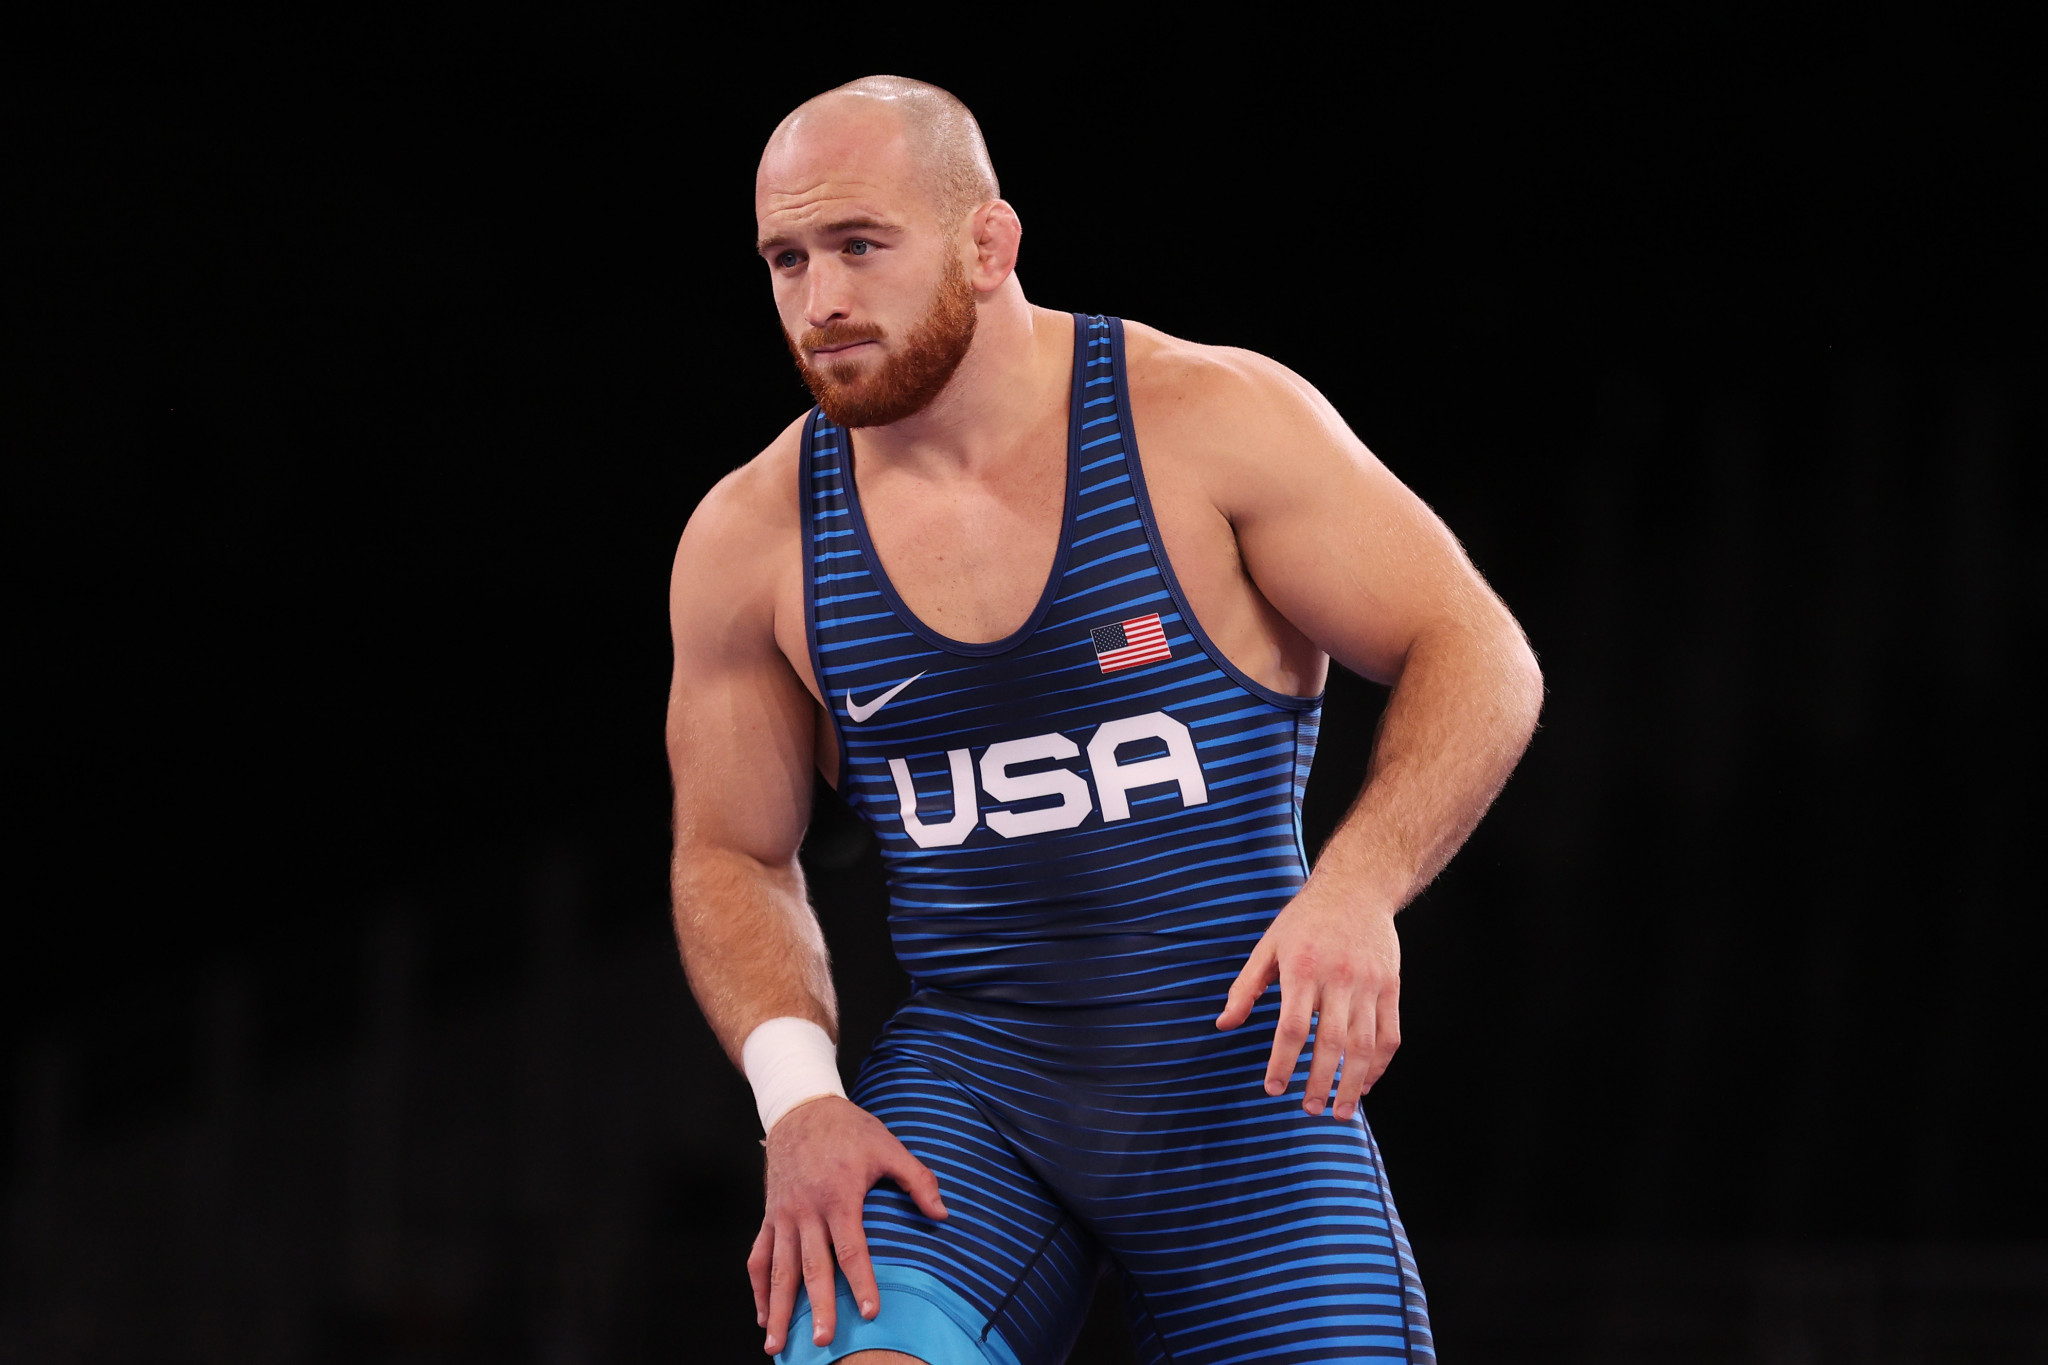 Frederick Snyder wins third world title on final day of World Wrestling Championships